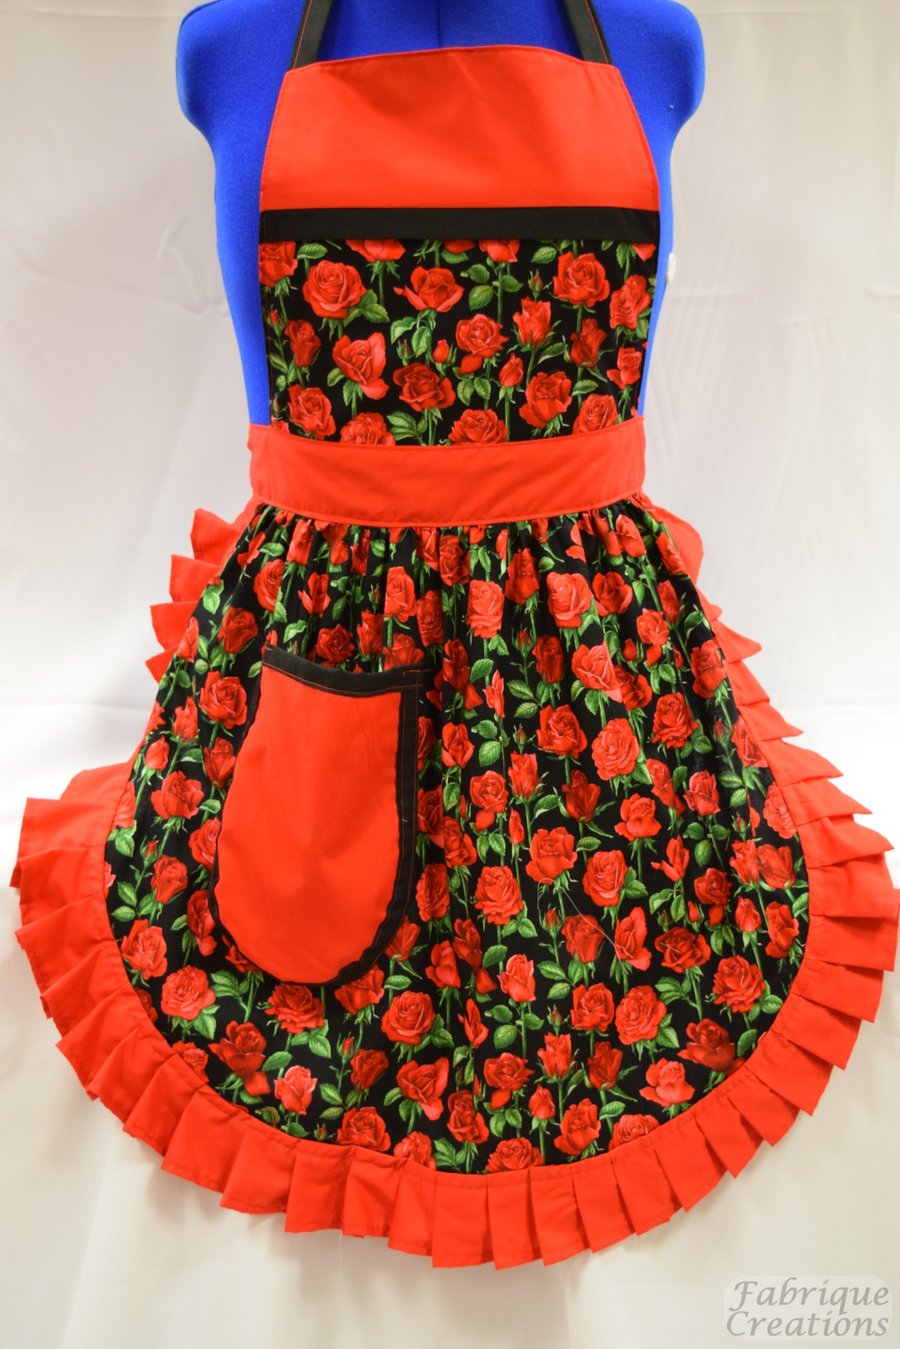 50s Style Full Apron - Nutex - Red Roses (Stems) on Black with Red Trim